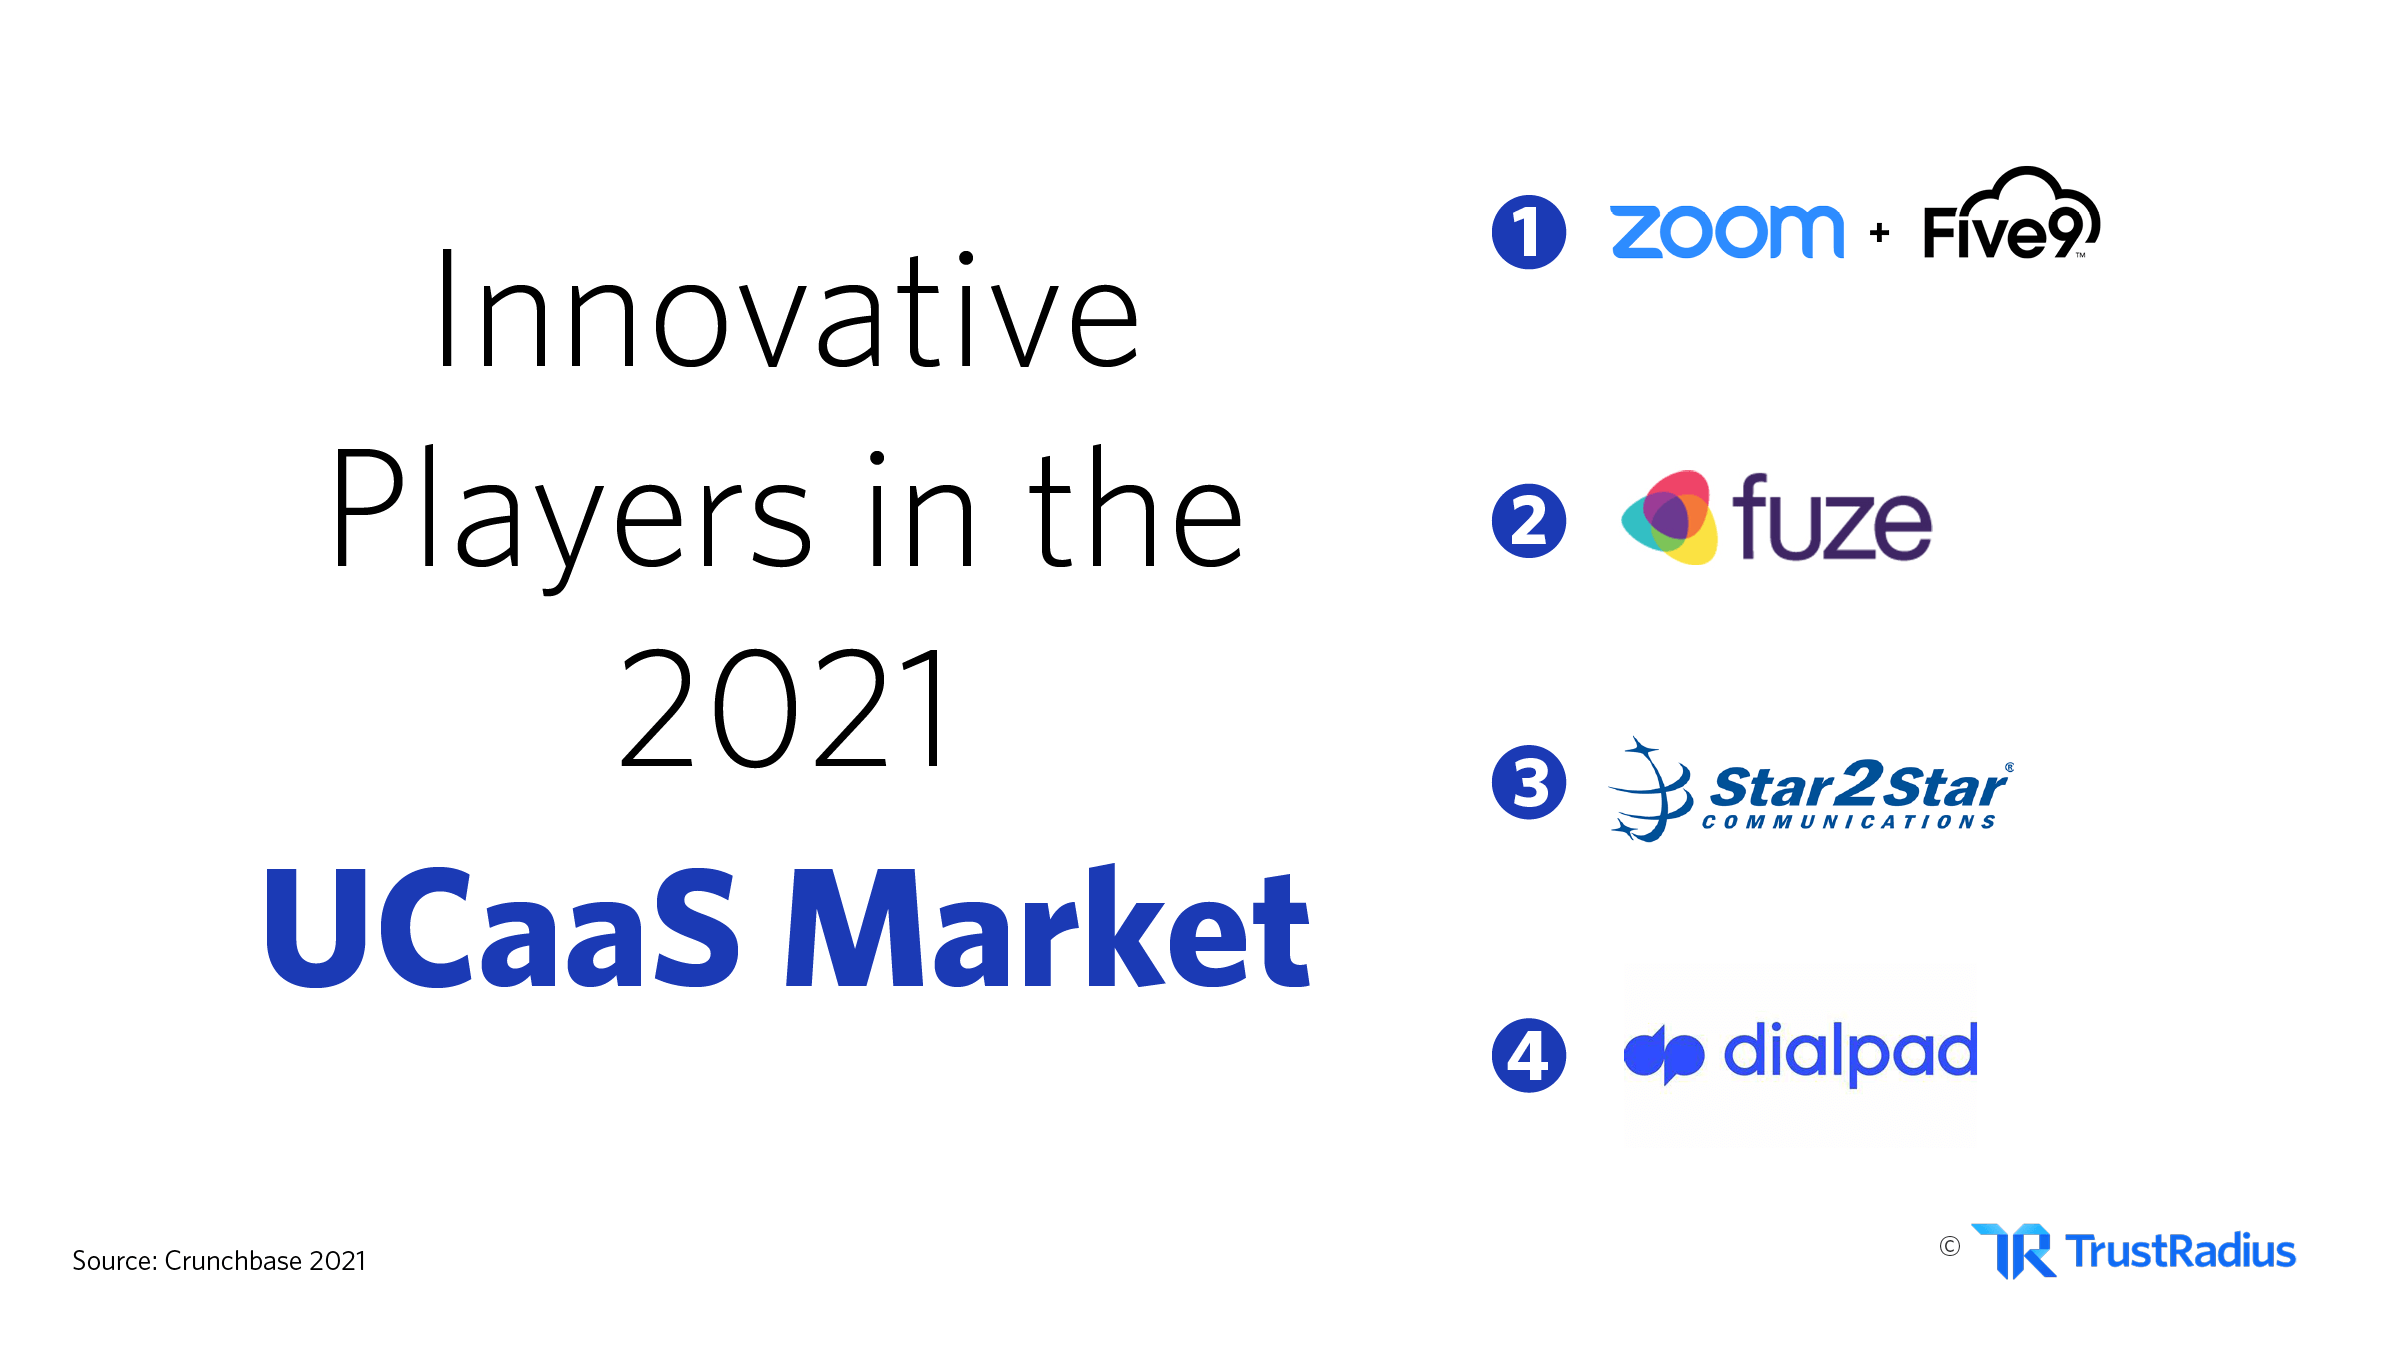 innovative players in the UCaaS market in 2021